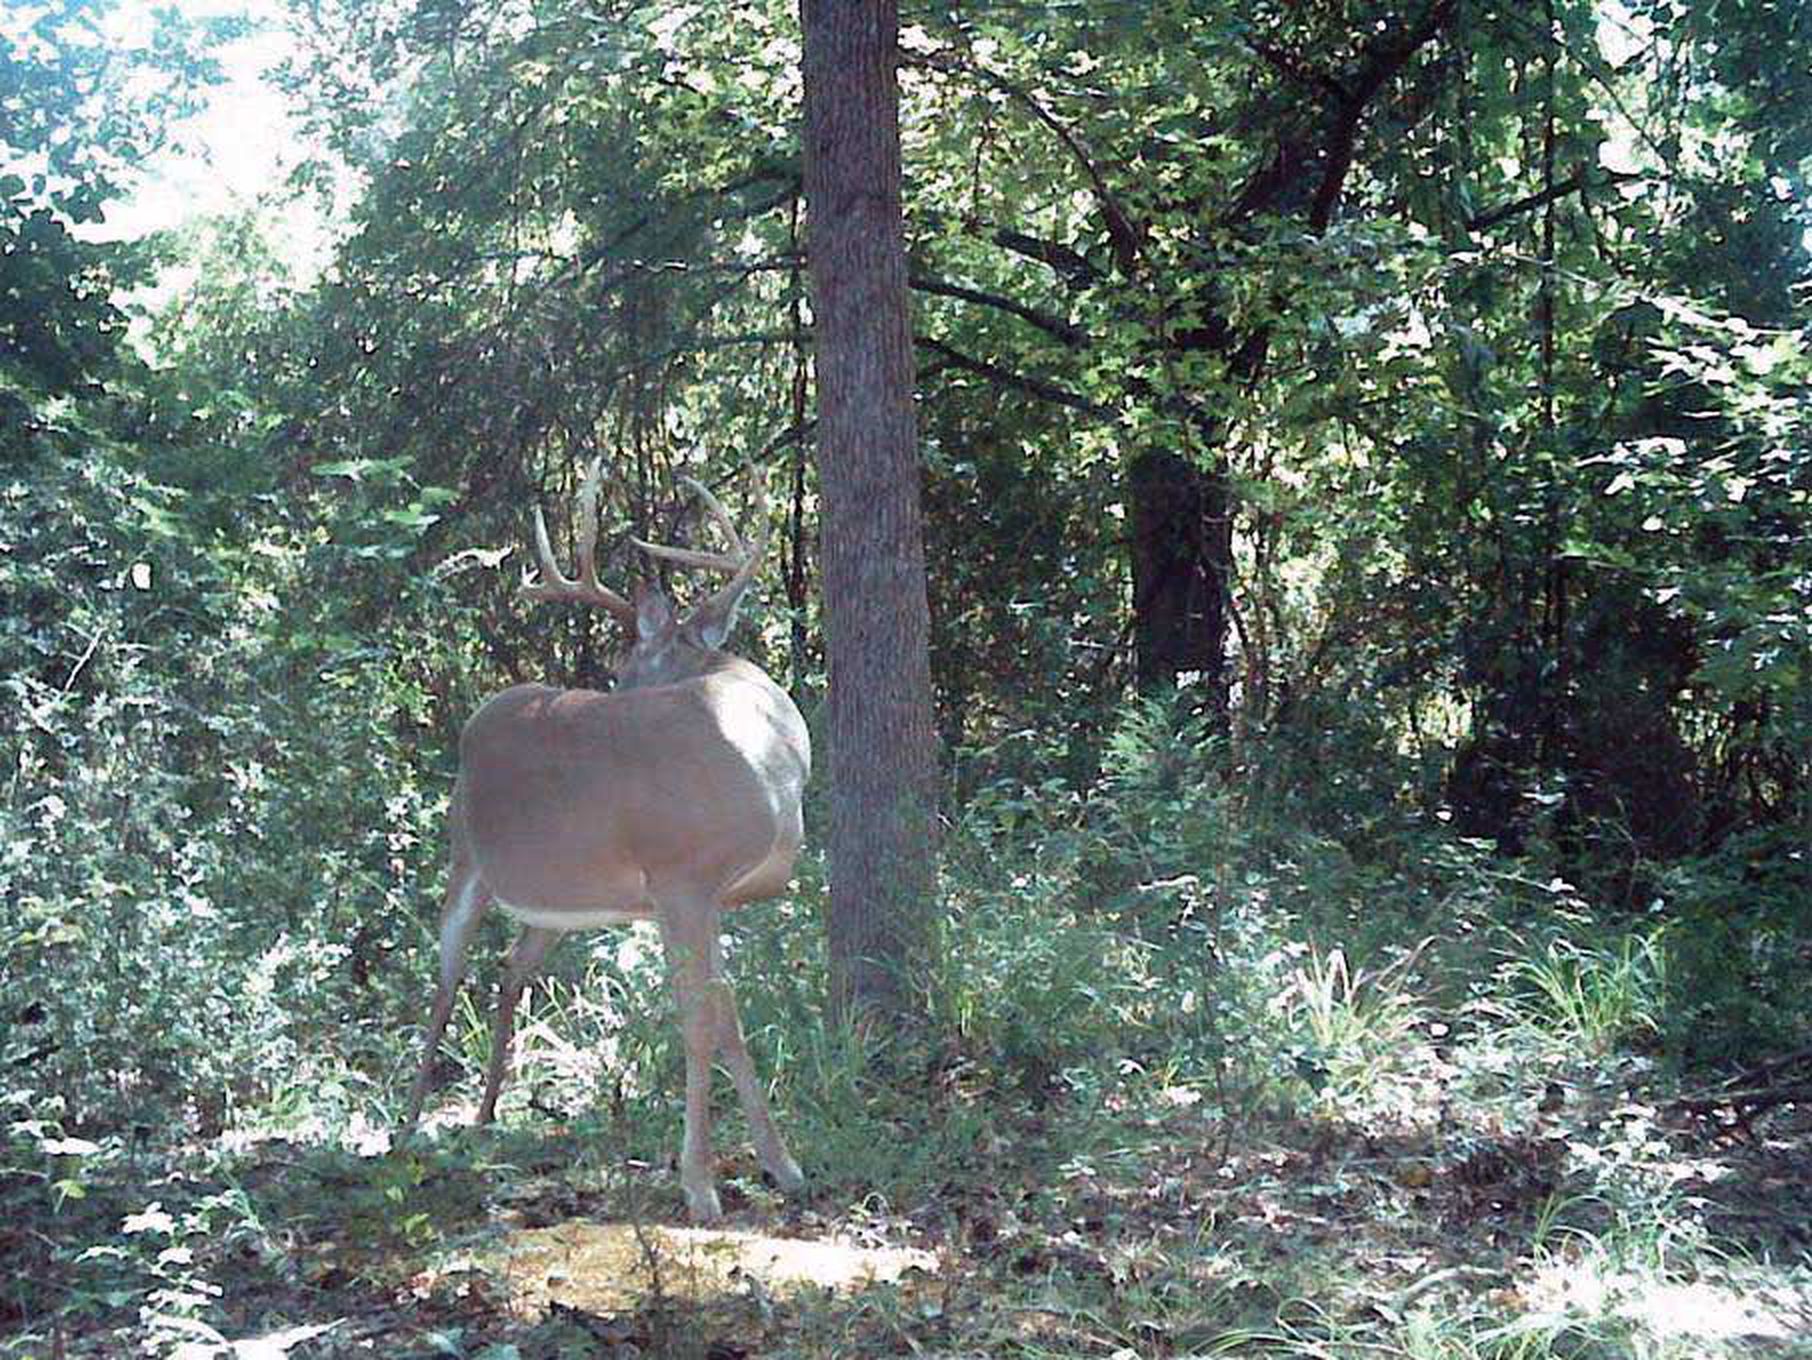 Trail camera images from the authors study showed mature bucks moving during daylight hours.